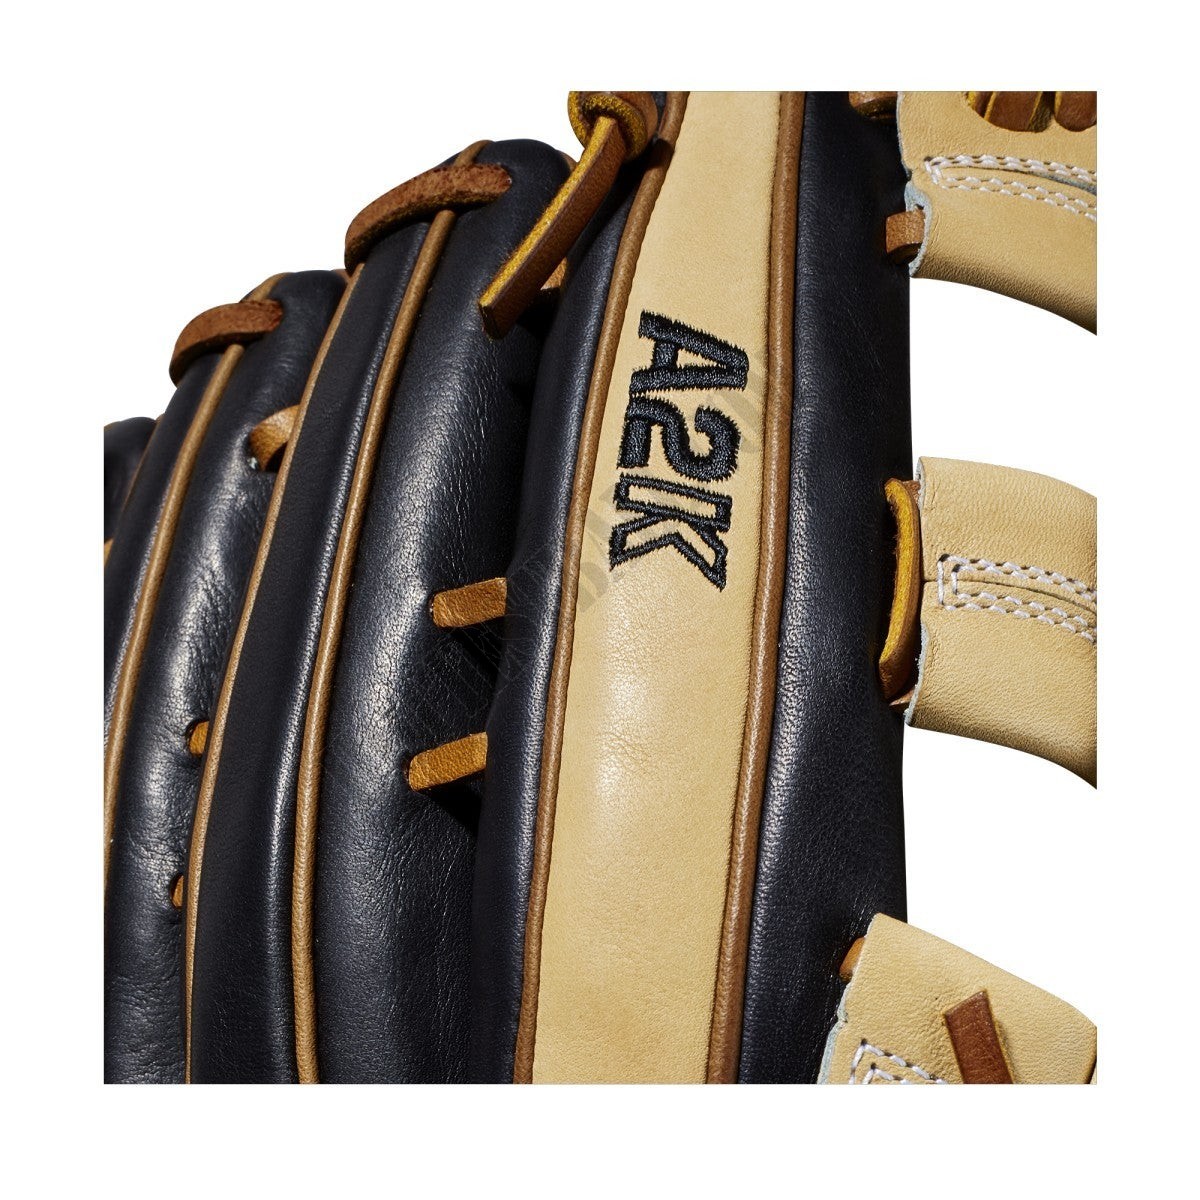 2020 A2K 1799 12.75" Outfield Baseball Glove ● Wilson Promotions - -6